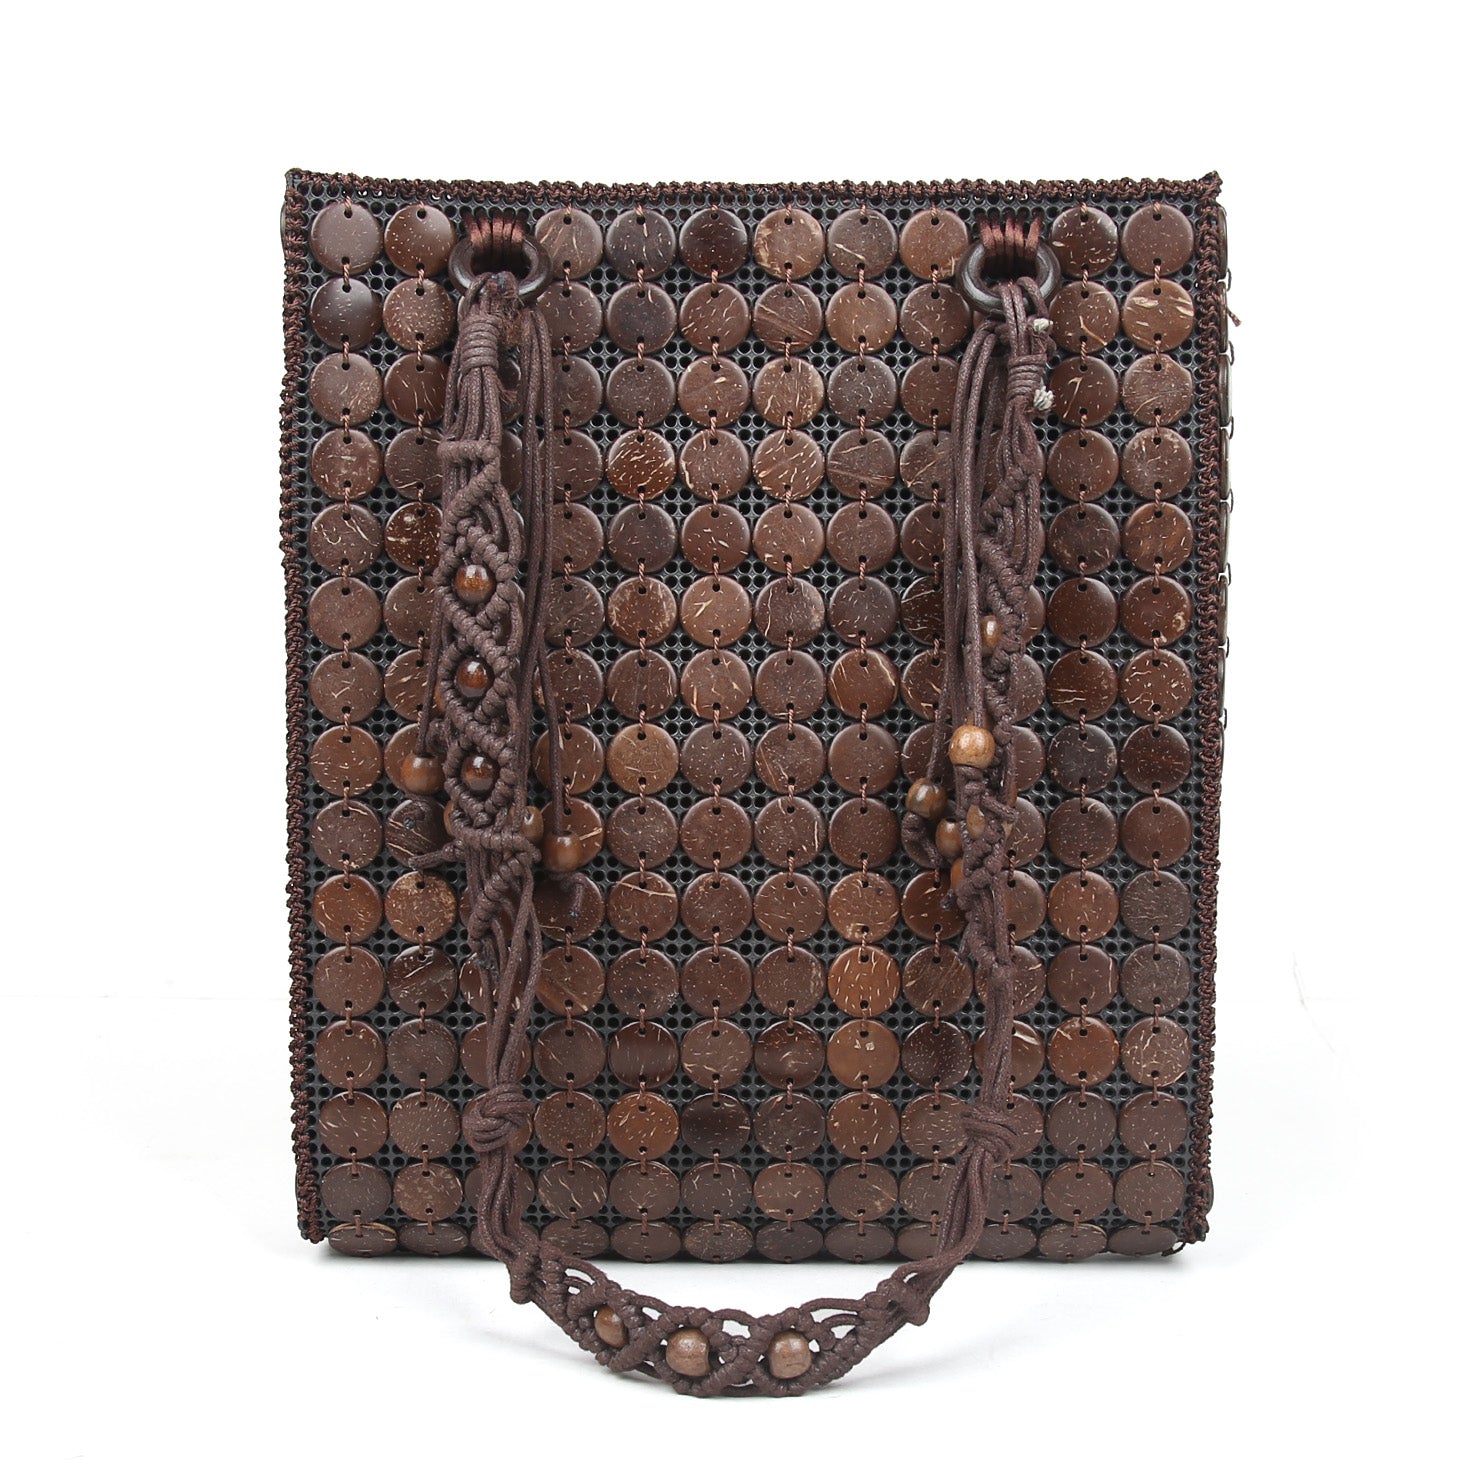 DAISYLIFE Natural and Eco-Friendly Coconut Shell Handbag in Rustic Brown Color